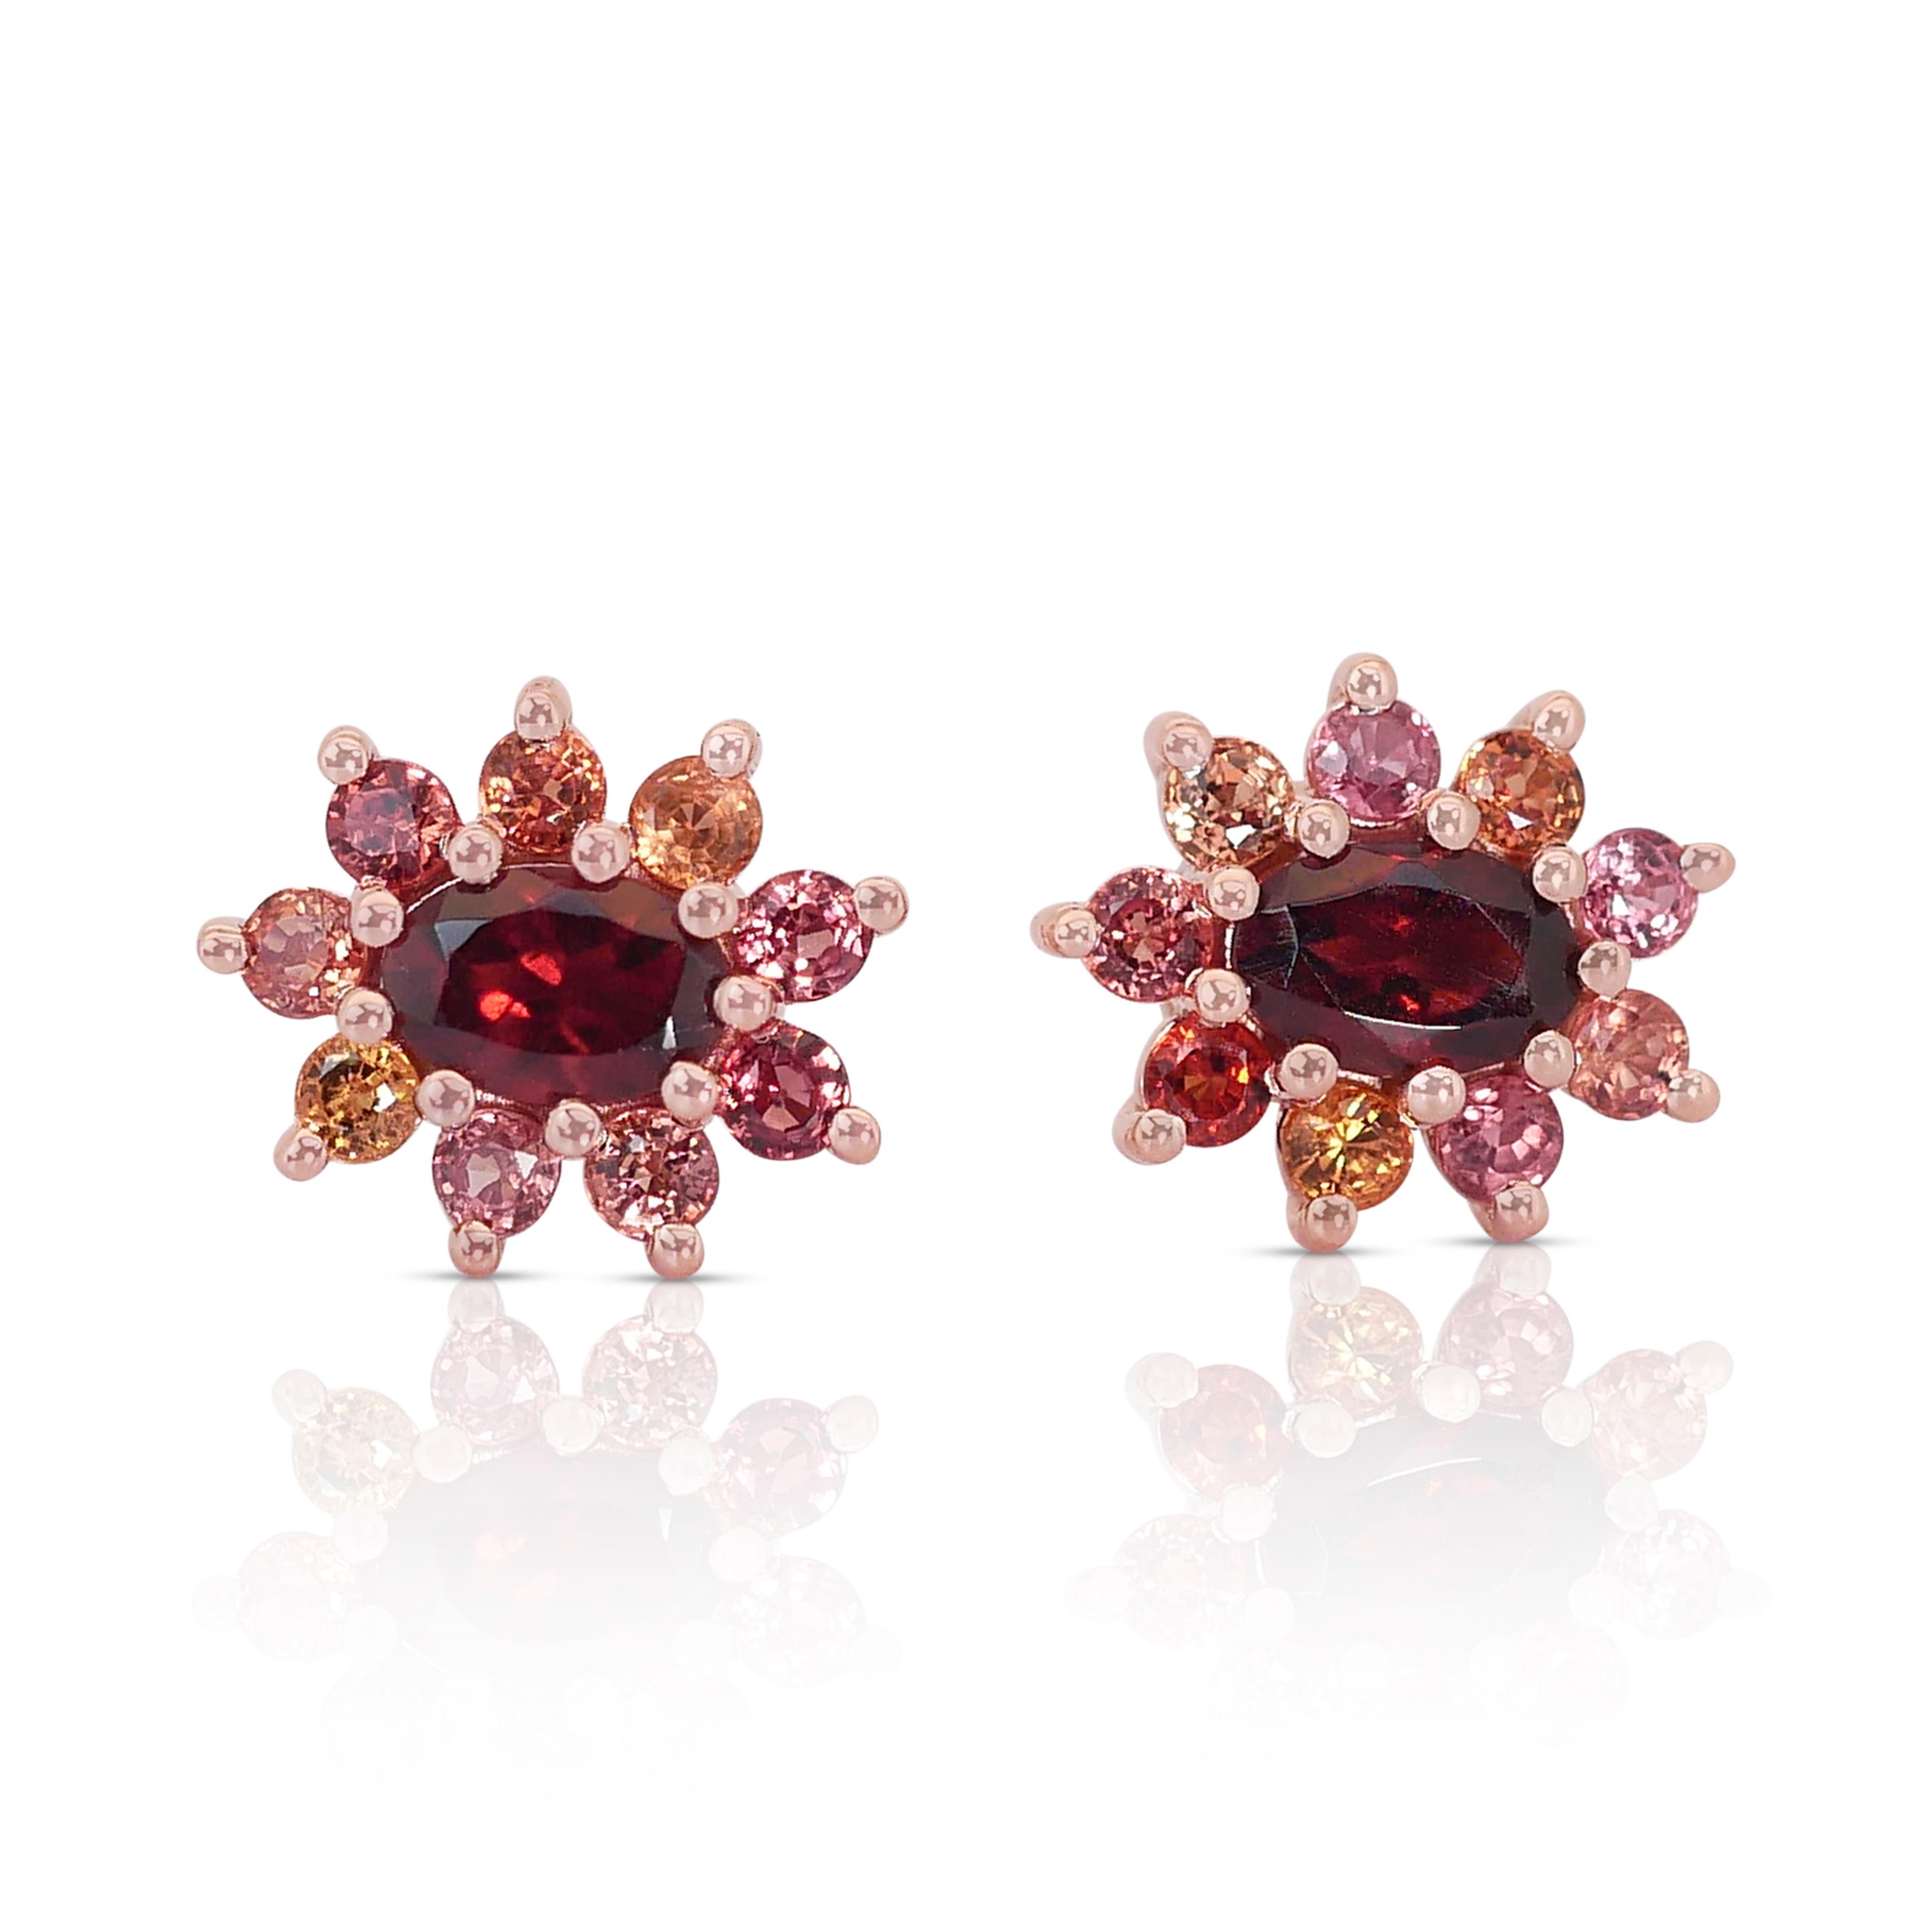 Captivating 14K Rose Gold Garnet Stud Earrings w/2.40ct - AIG Certified

Featuring our captivating 14K Rose Gold Garnet Stud Earrings, adorned with a mesmerizing total carat weight of 2.40ct. Crafted to perfection, these earrings feature two